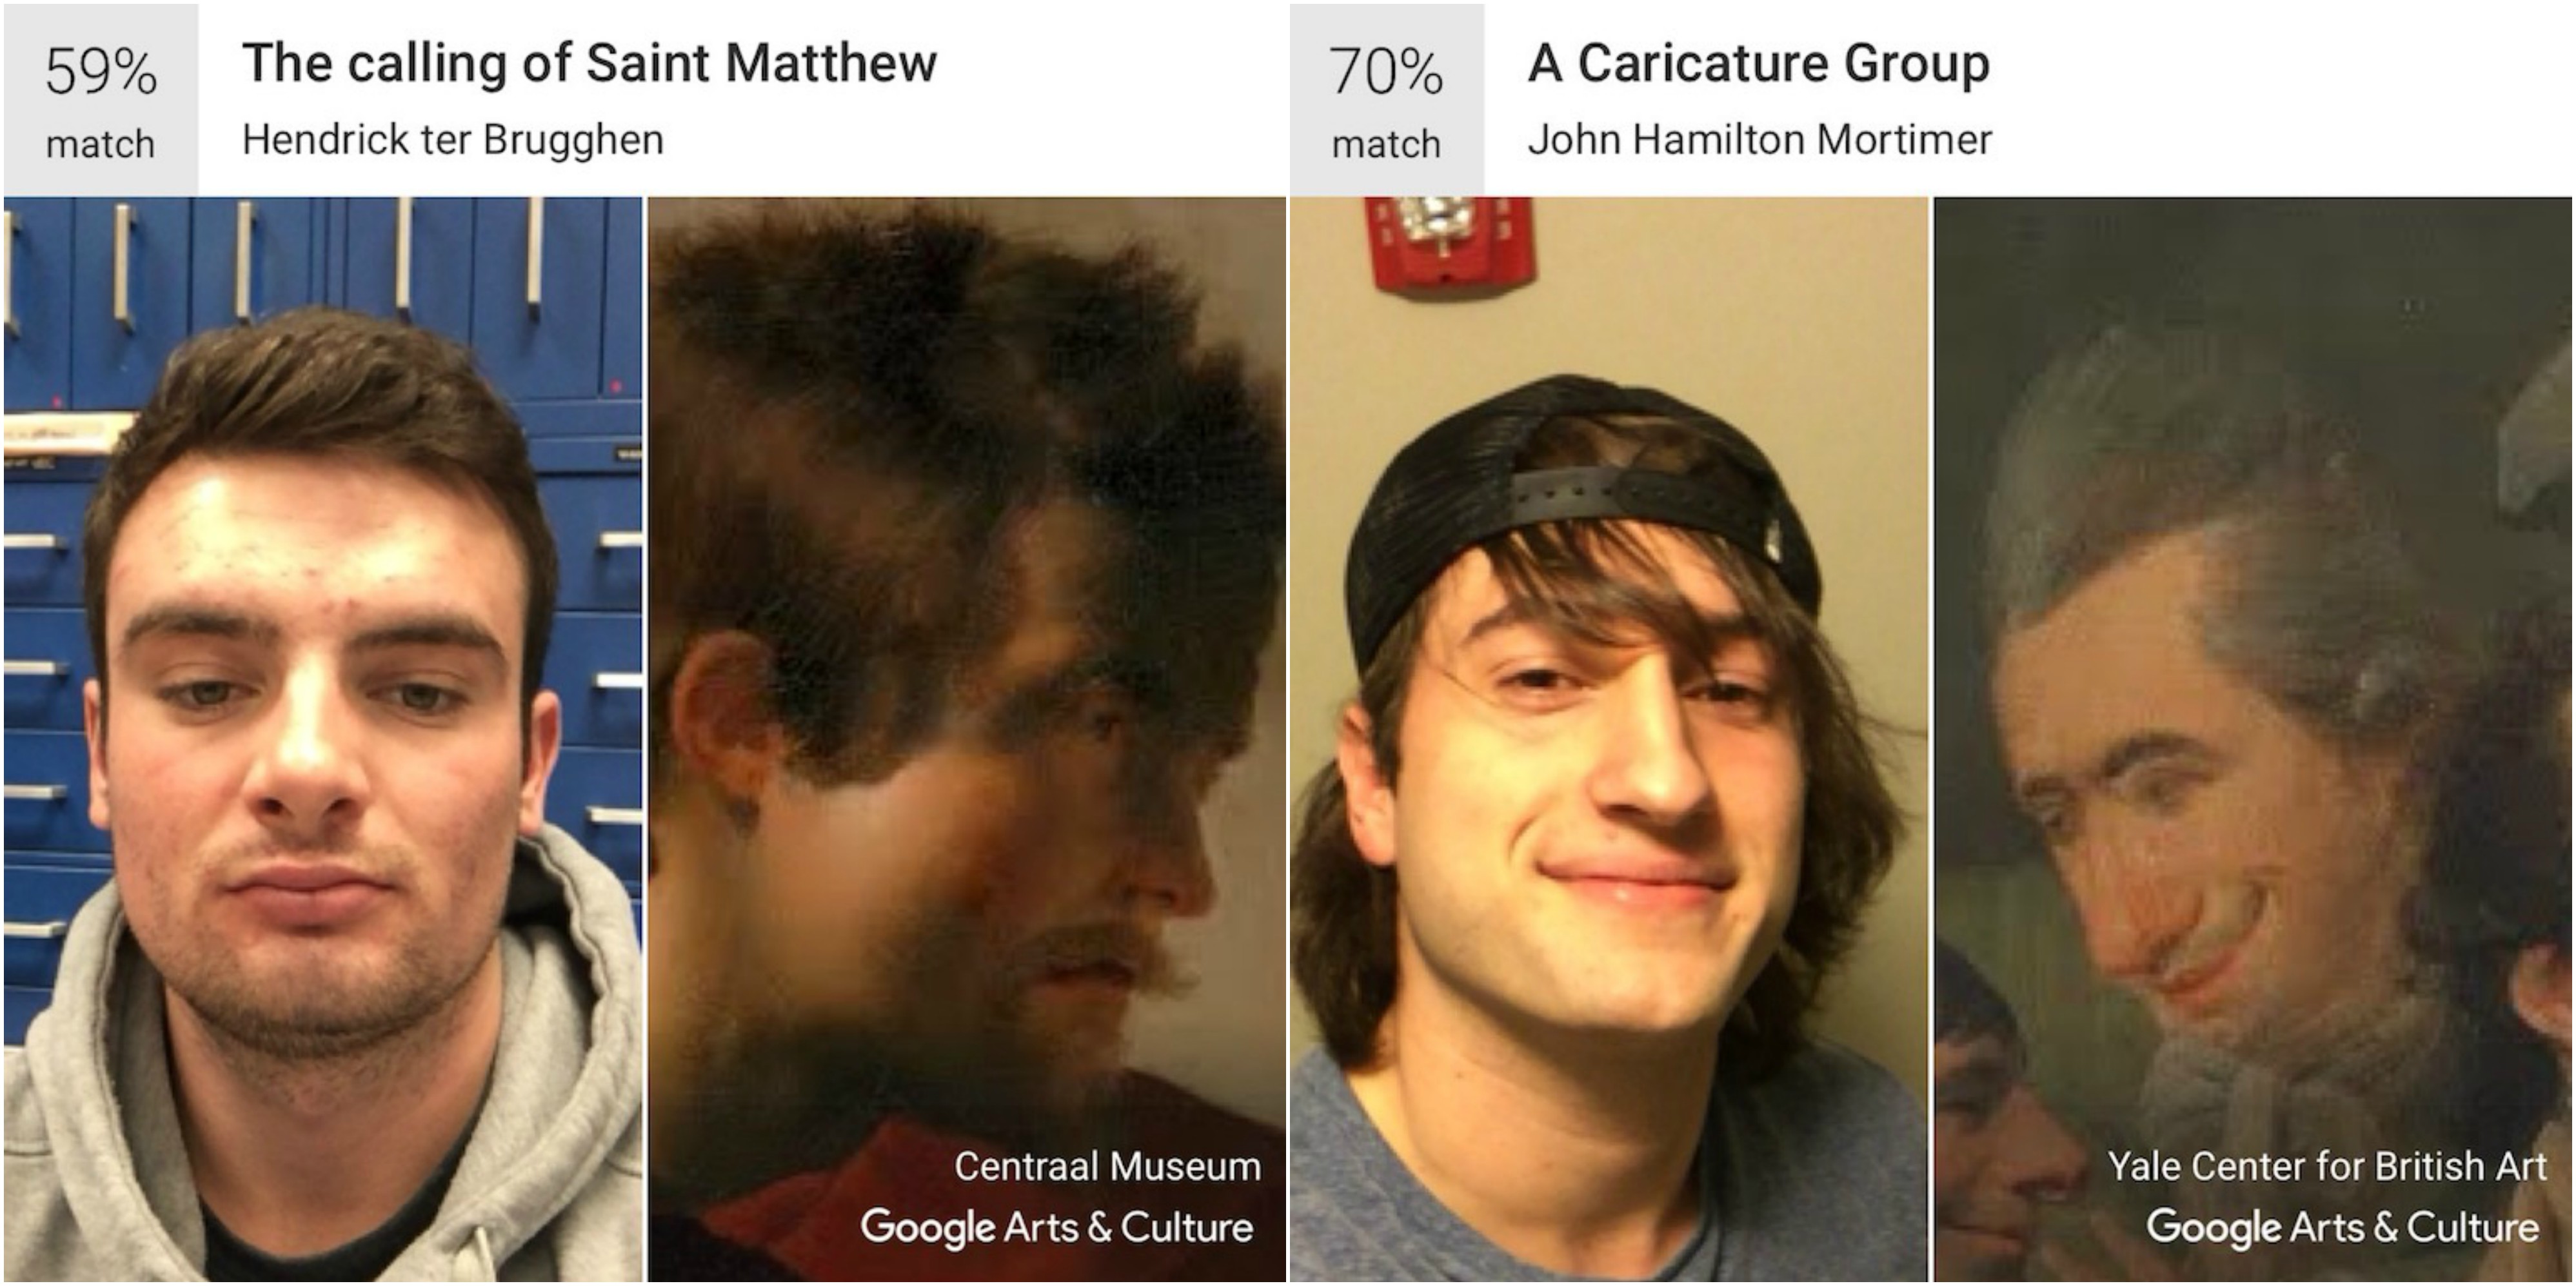 Google Arts And Culture App Delivers Hurtful Caricatures The Maine Campus